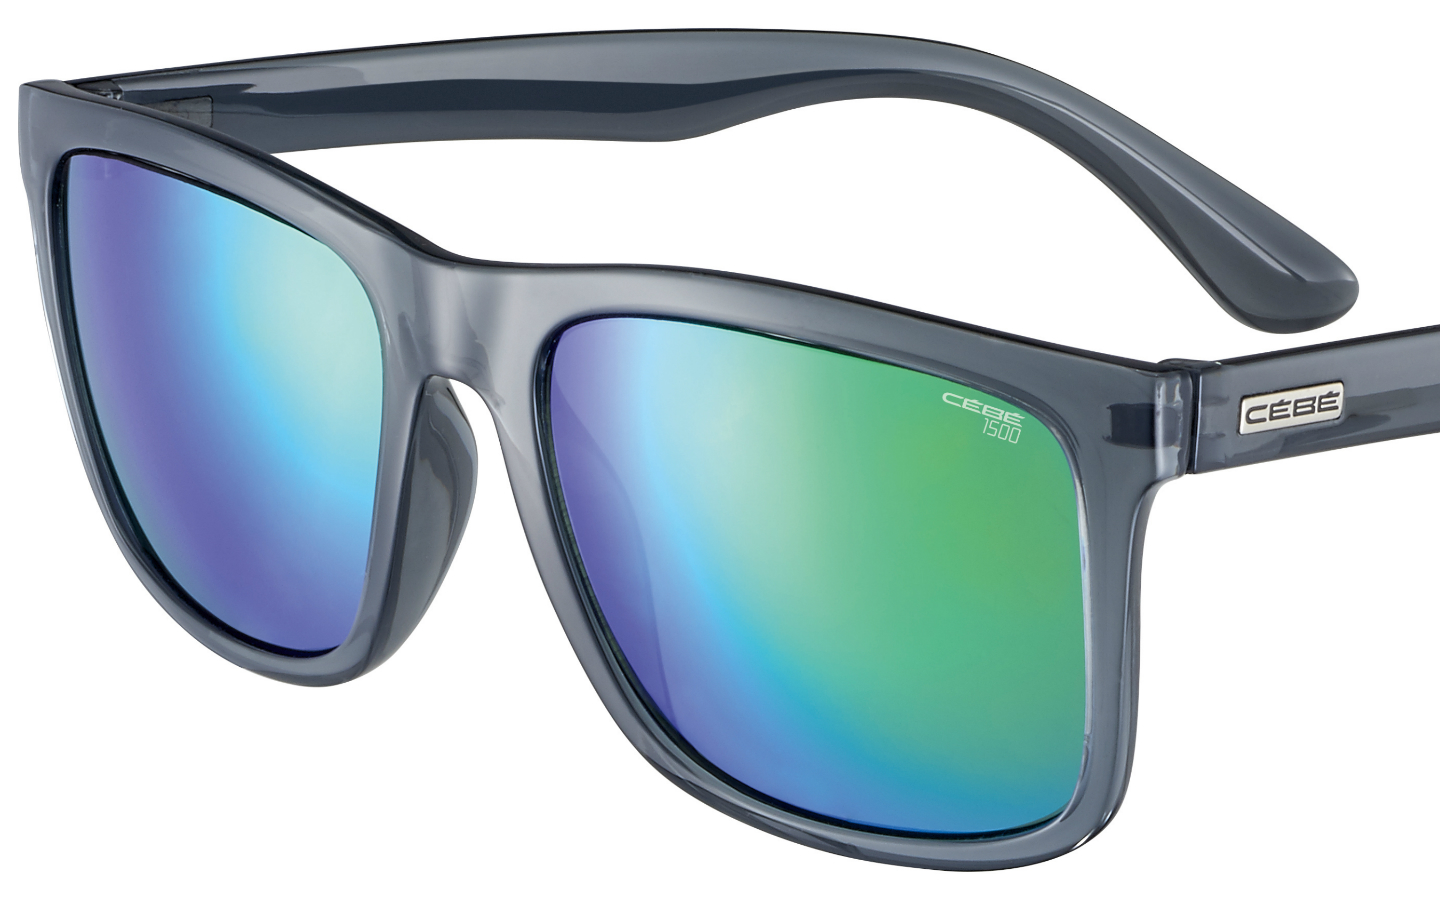 Cebe-Hipe-sunglasses-for-drivers-reviewed